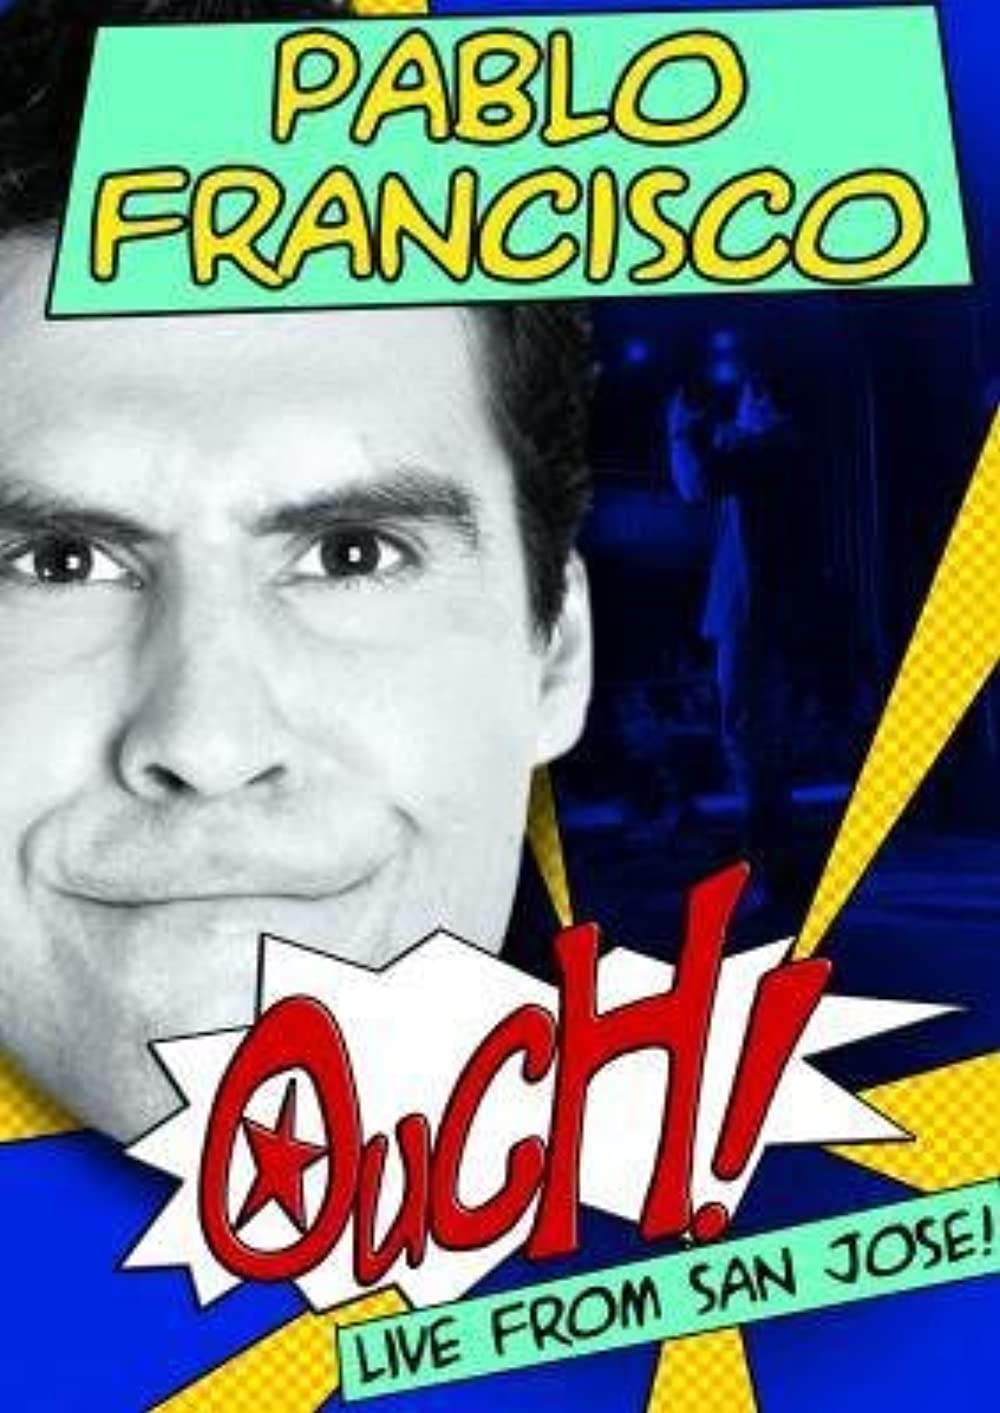 Download Pablo Francisco: Ouch! Live from San Jose Movie | Pablo Francisco: Ouch! Live From San Jose Full Movie